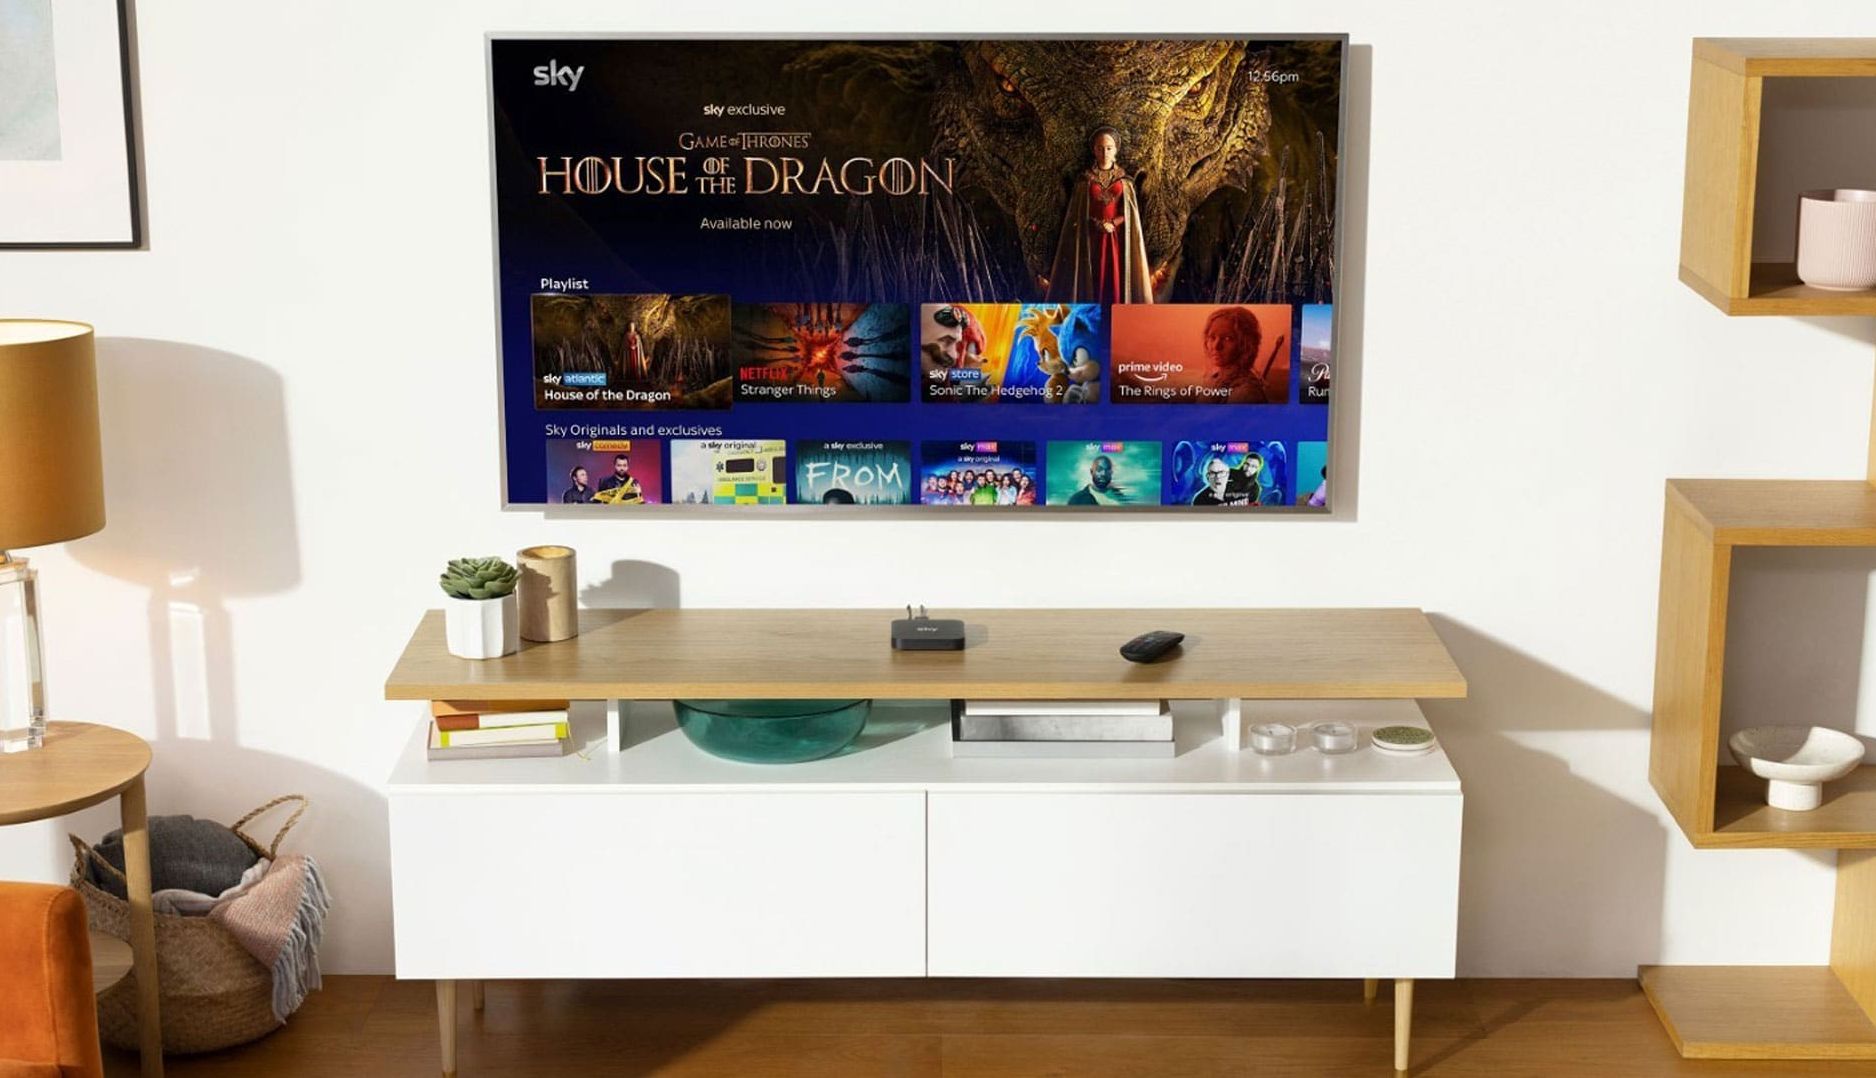 sky stream box on a table with a television in the background showing house of the dragon